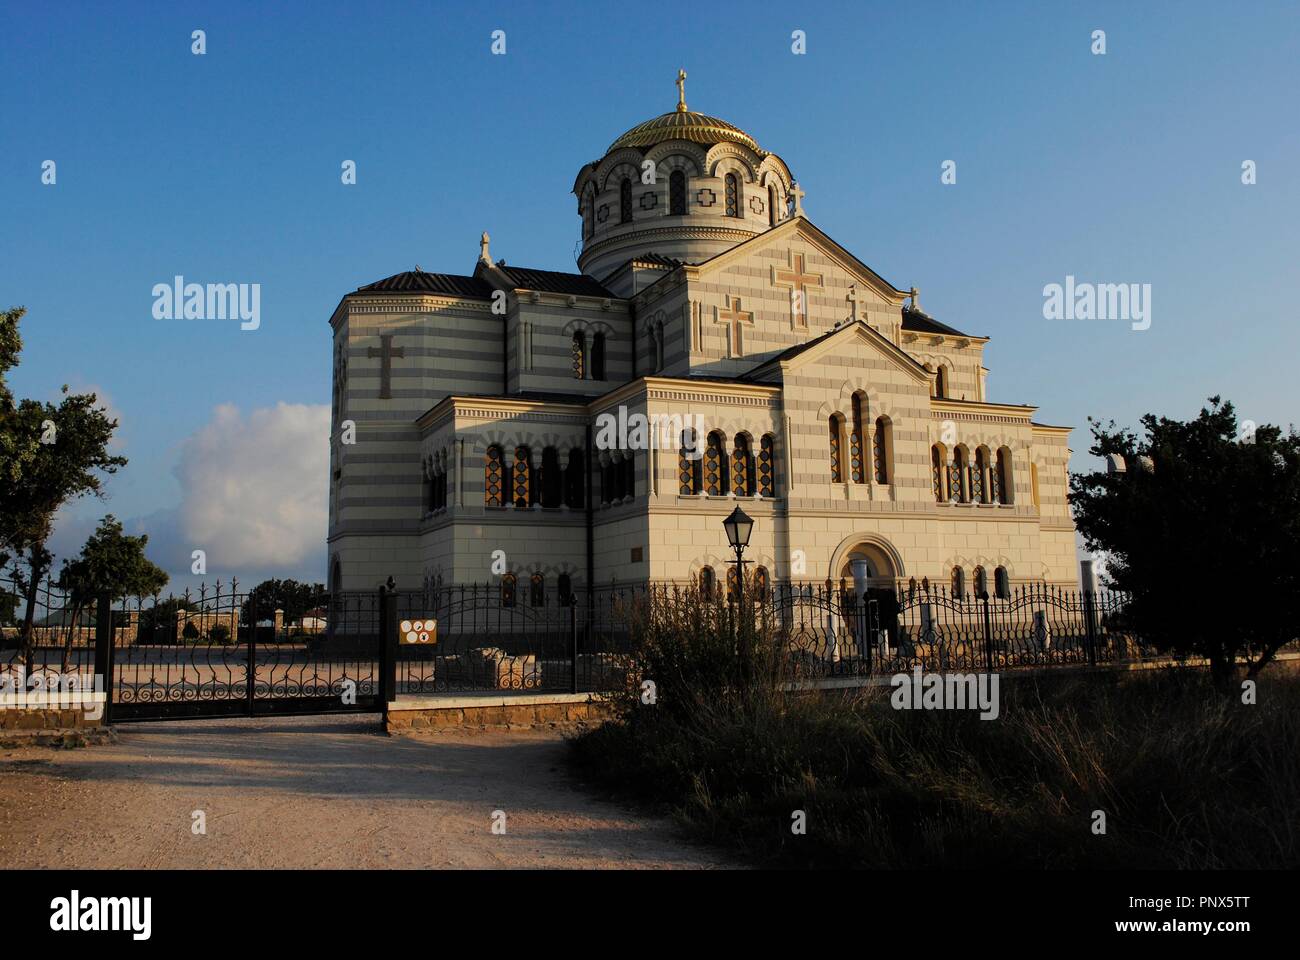 Ukraine. Saint Vladimir Cathedral. Neo-Byzantine Russian Orthodox Church built at 19th century. Reconstructed at 21th century by E. Osadchiy. Exterior. Chersonesus Taurica. Sevastopol. Stock Photo